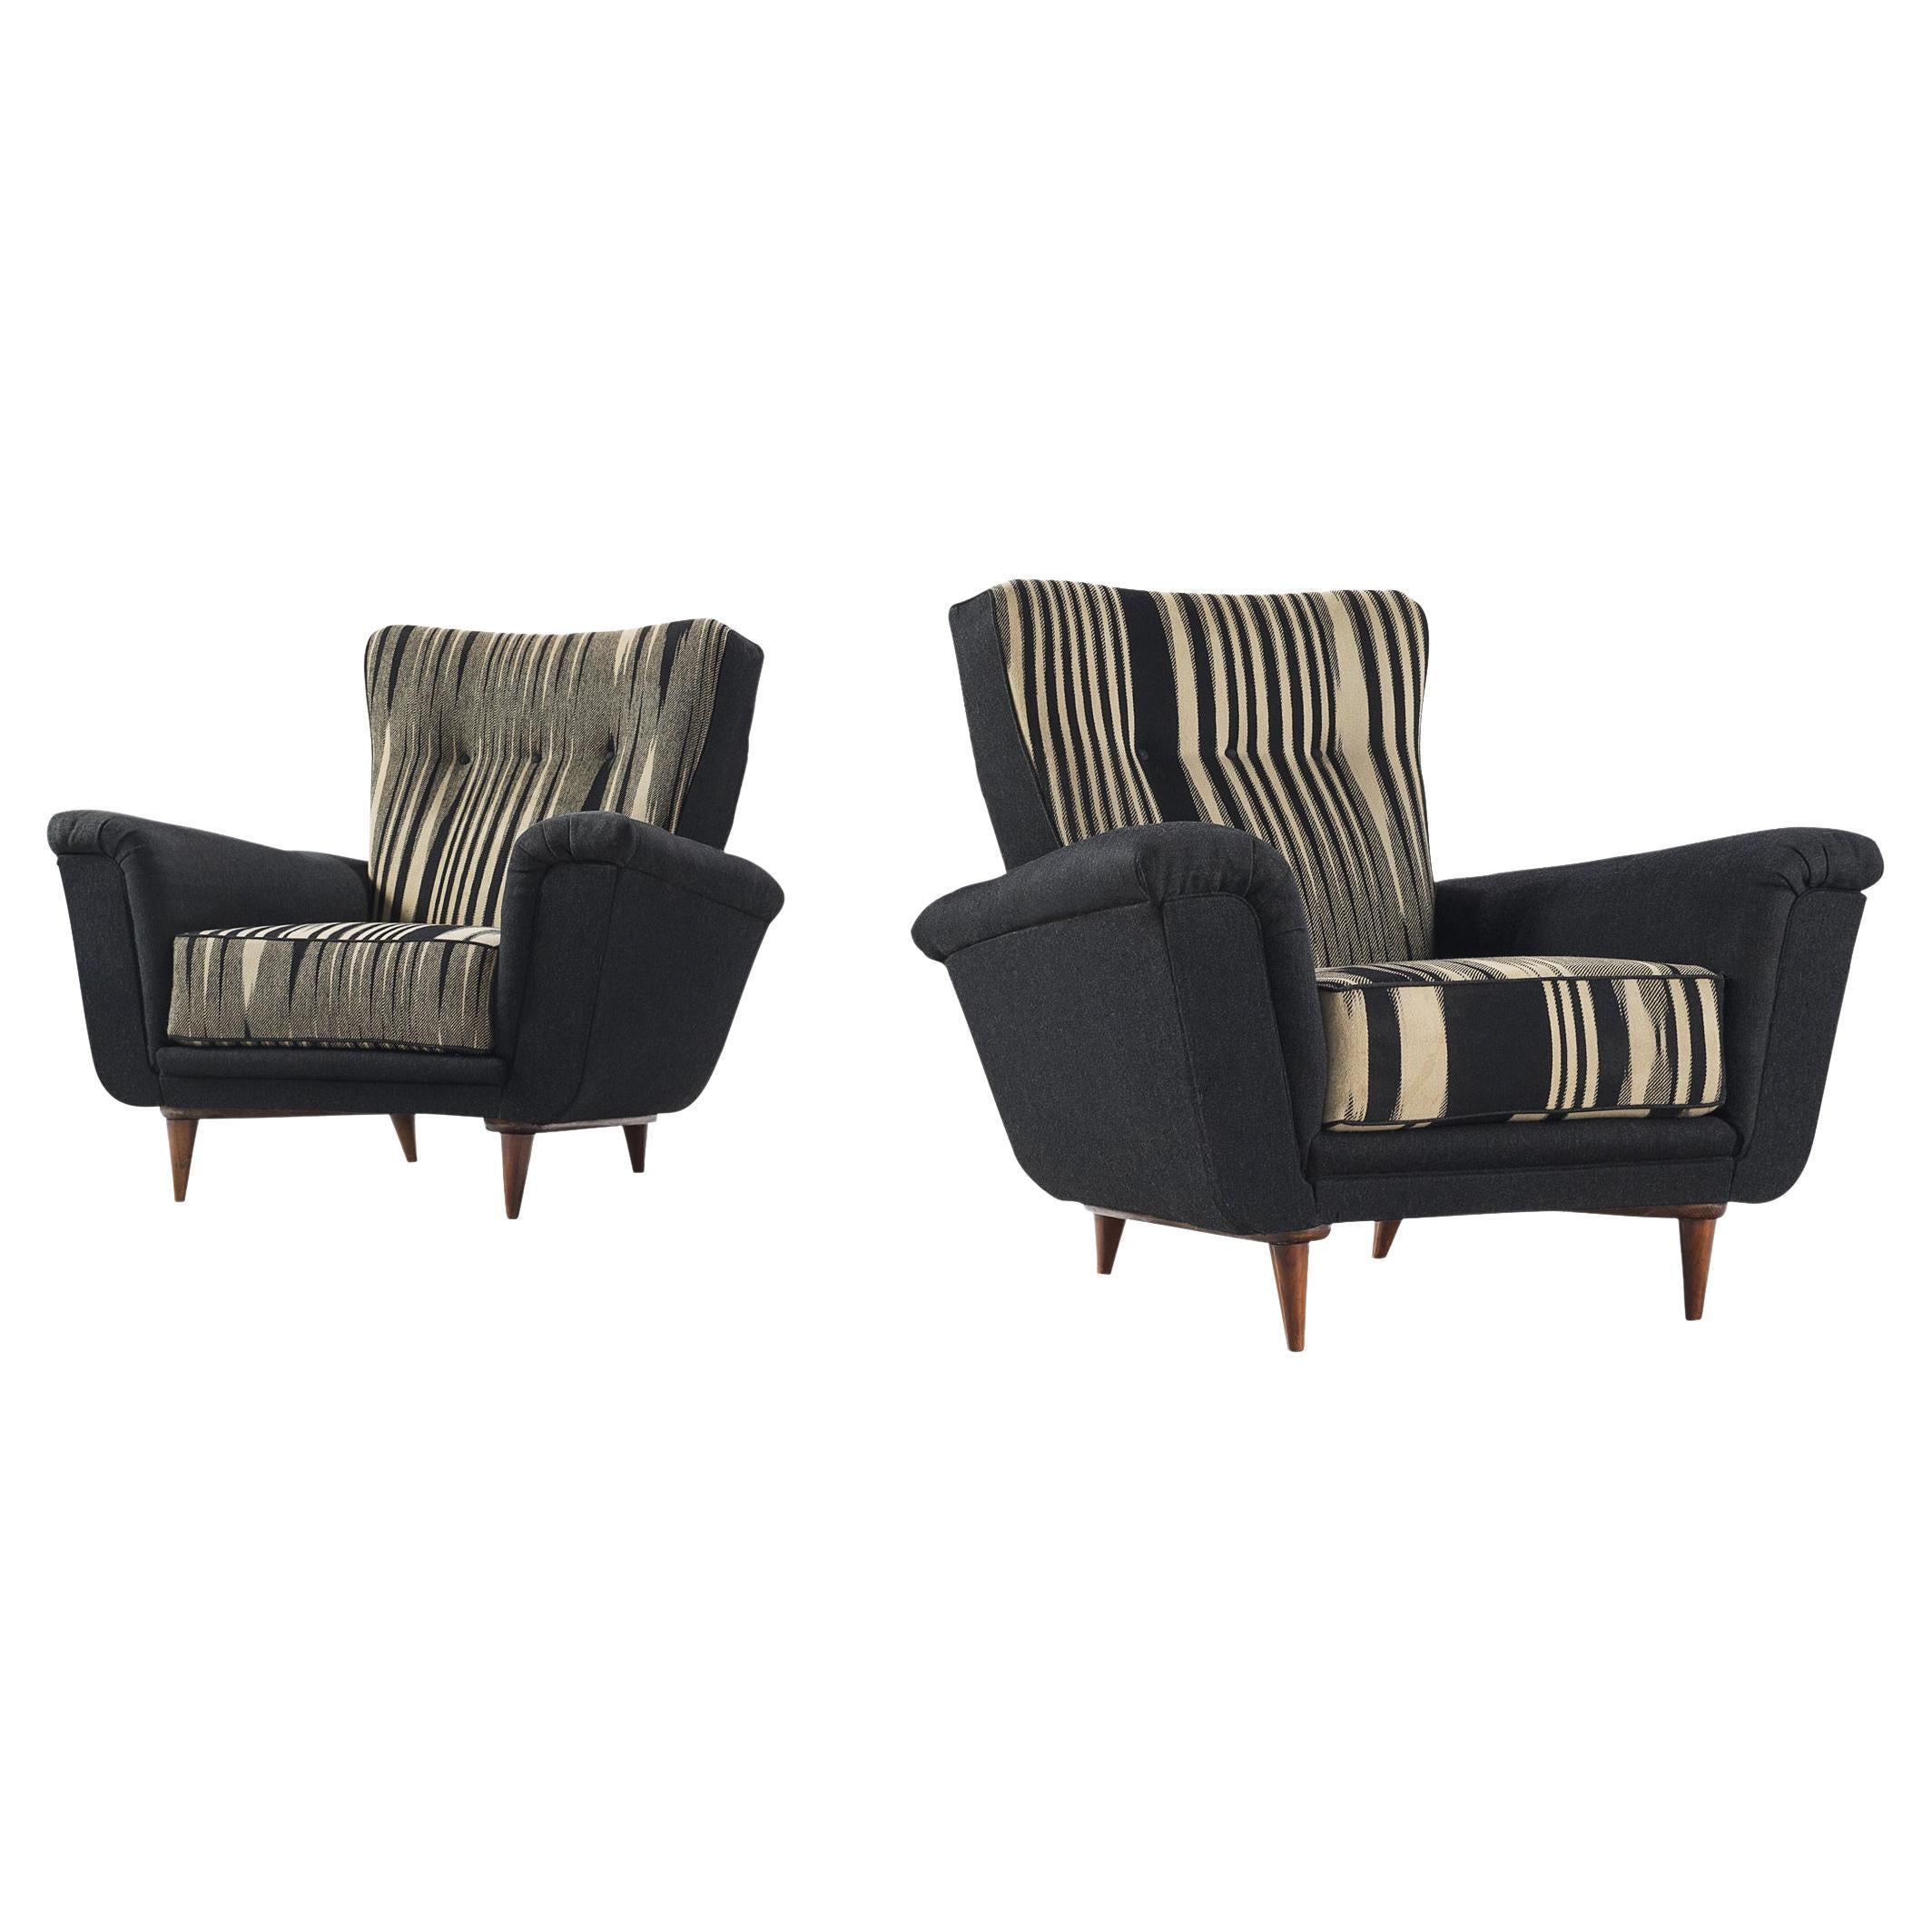 Theo Ruth for Artifort Pair of Lounge Chairs in Original Striped Upholstery 